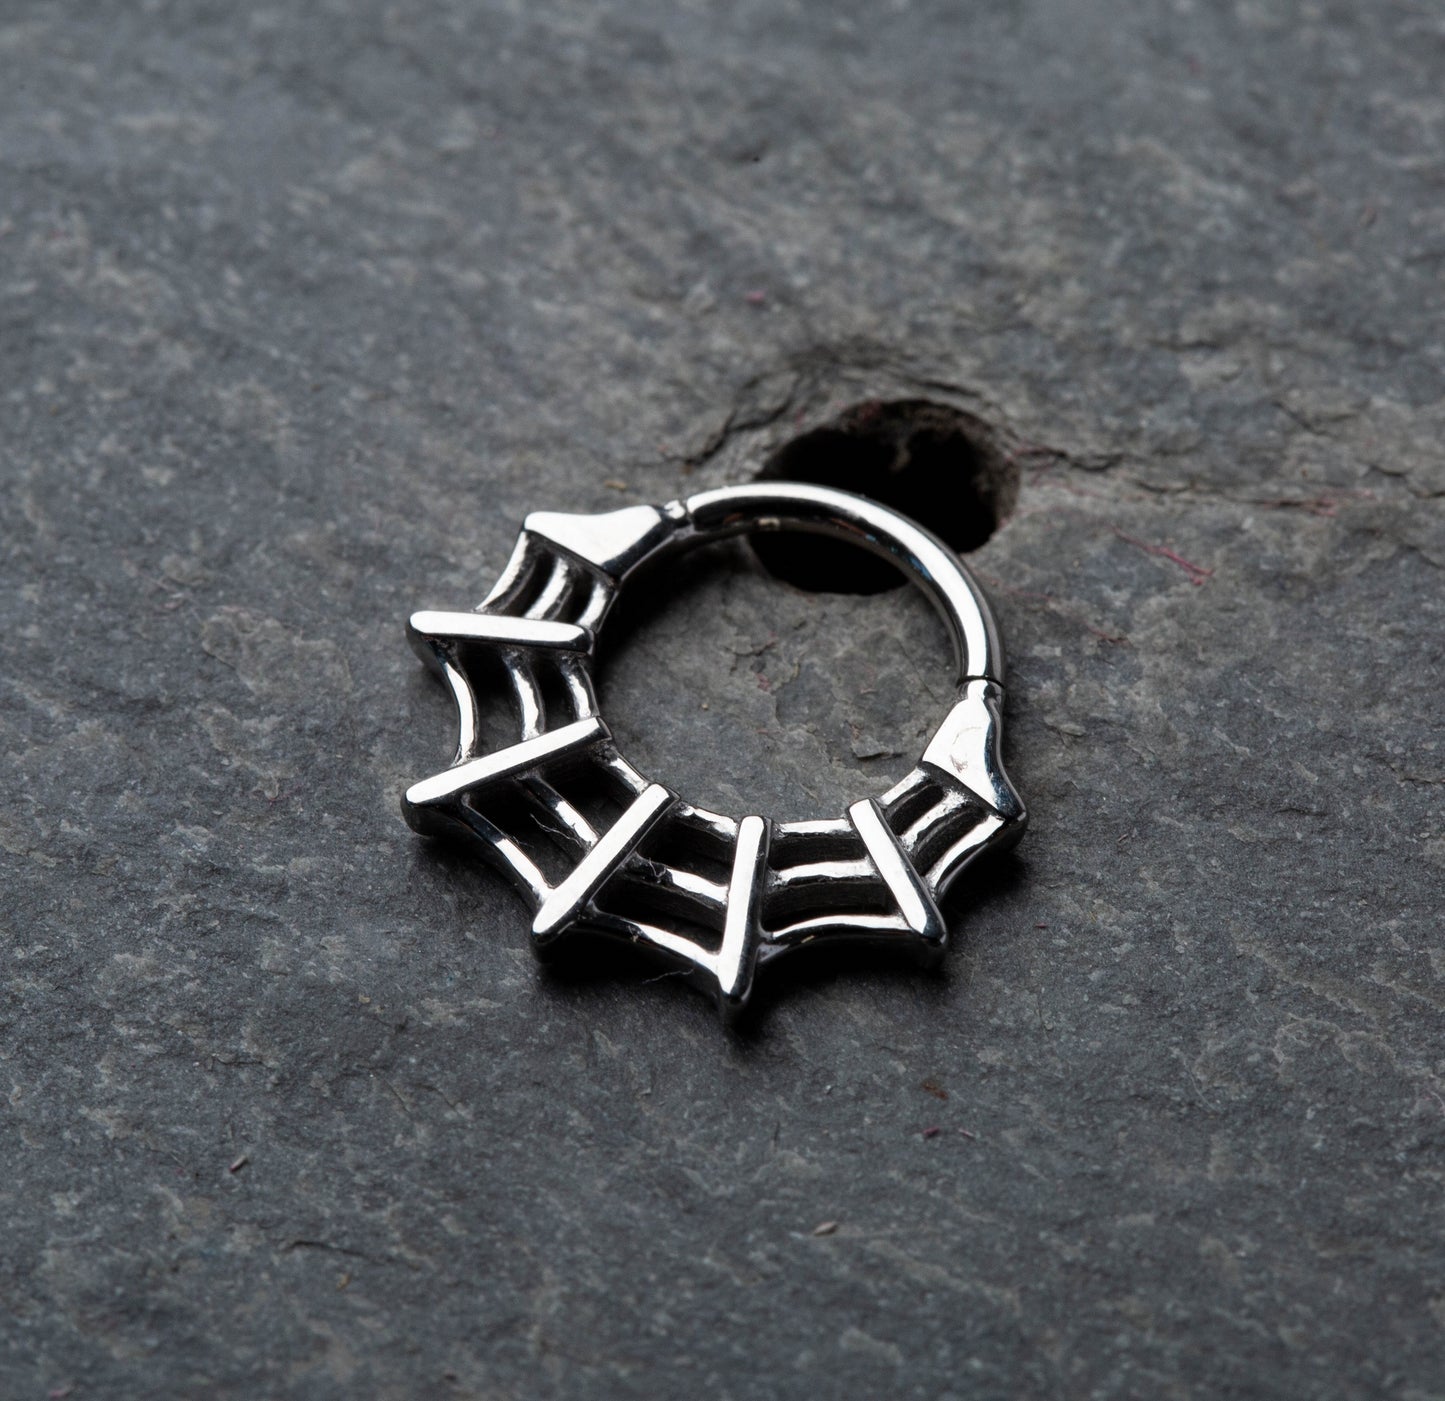 Spider Web Hinged Segment Ring - Stainless Steel